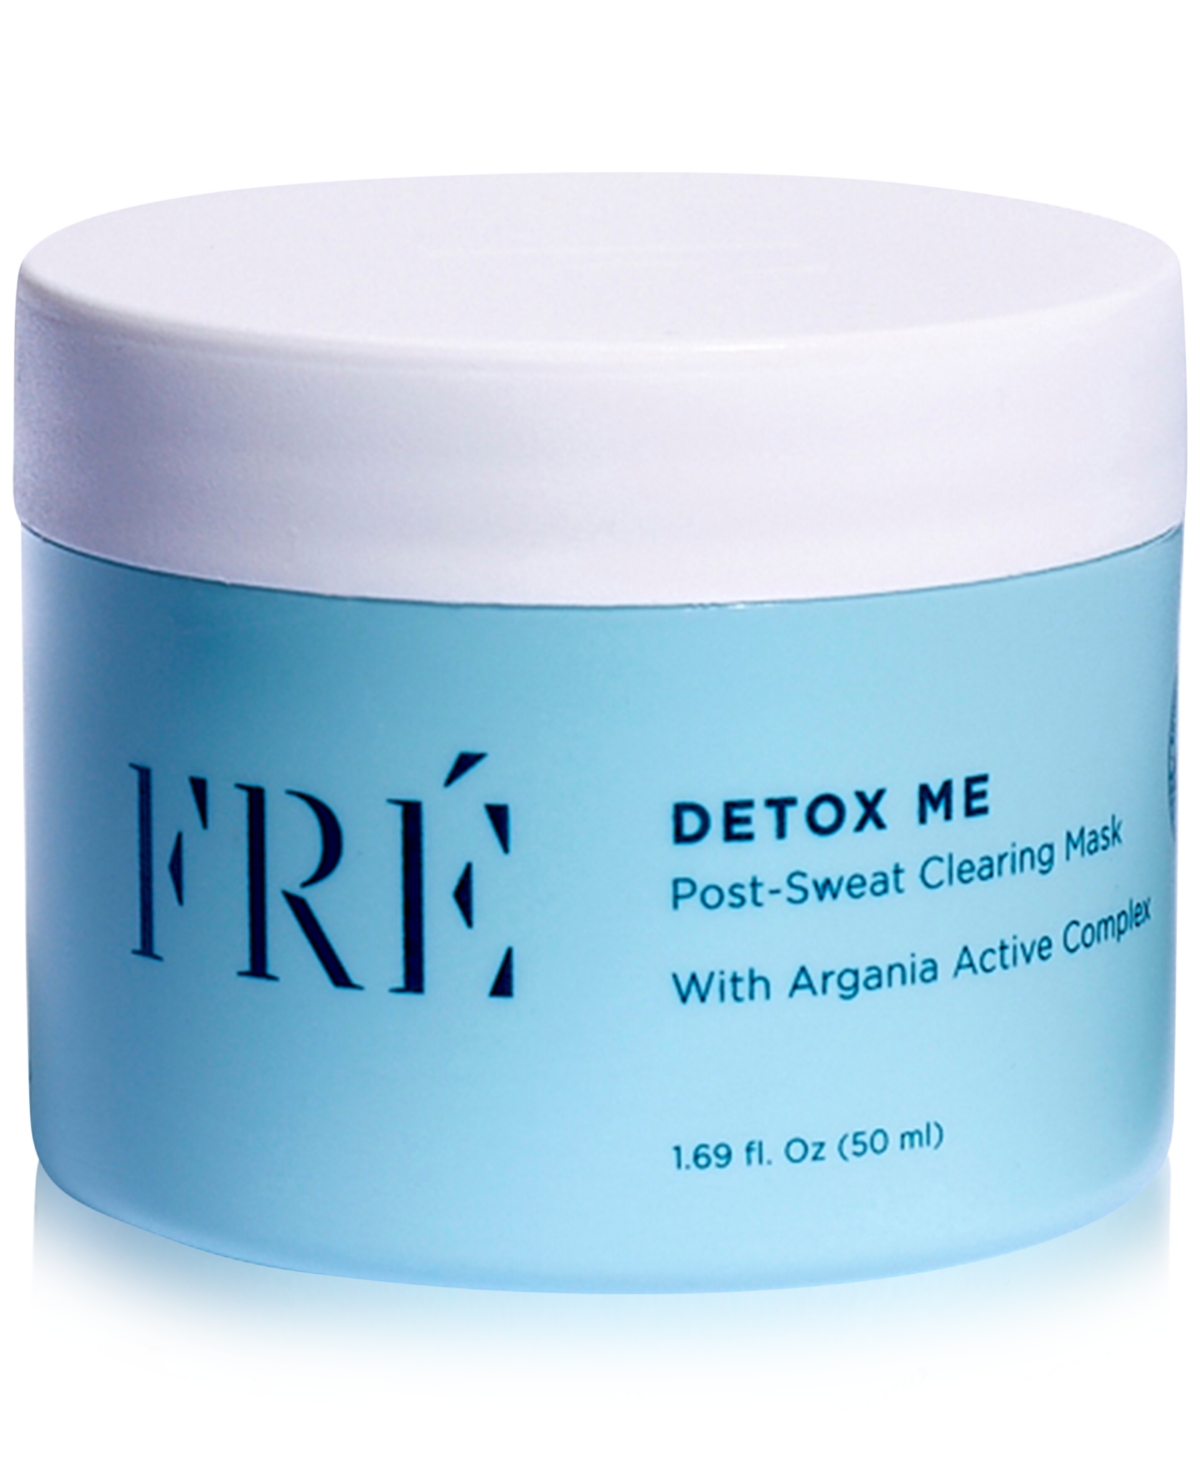 Fre Detox Me Clearing Mask, 1.69oz. In No Color